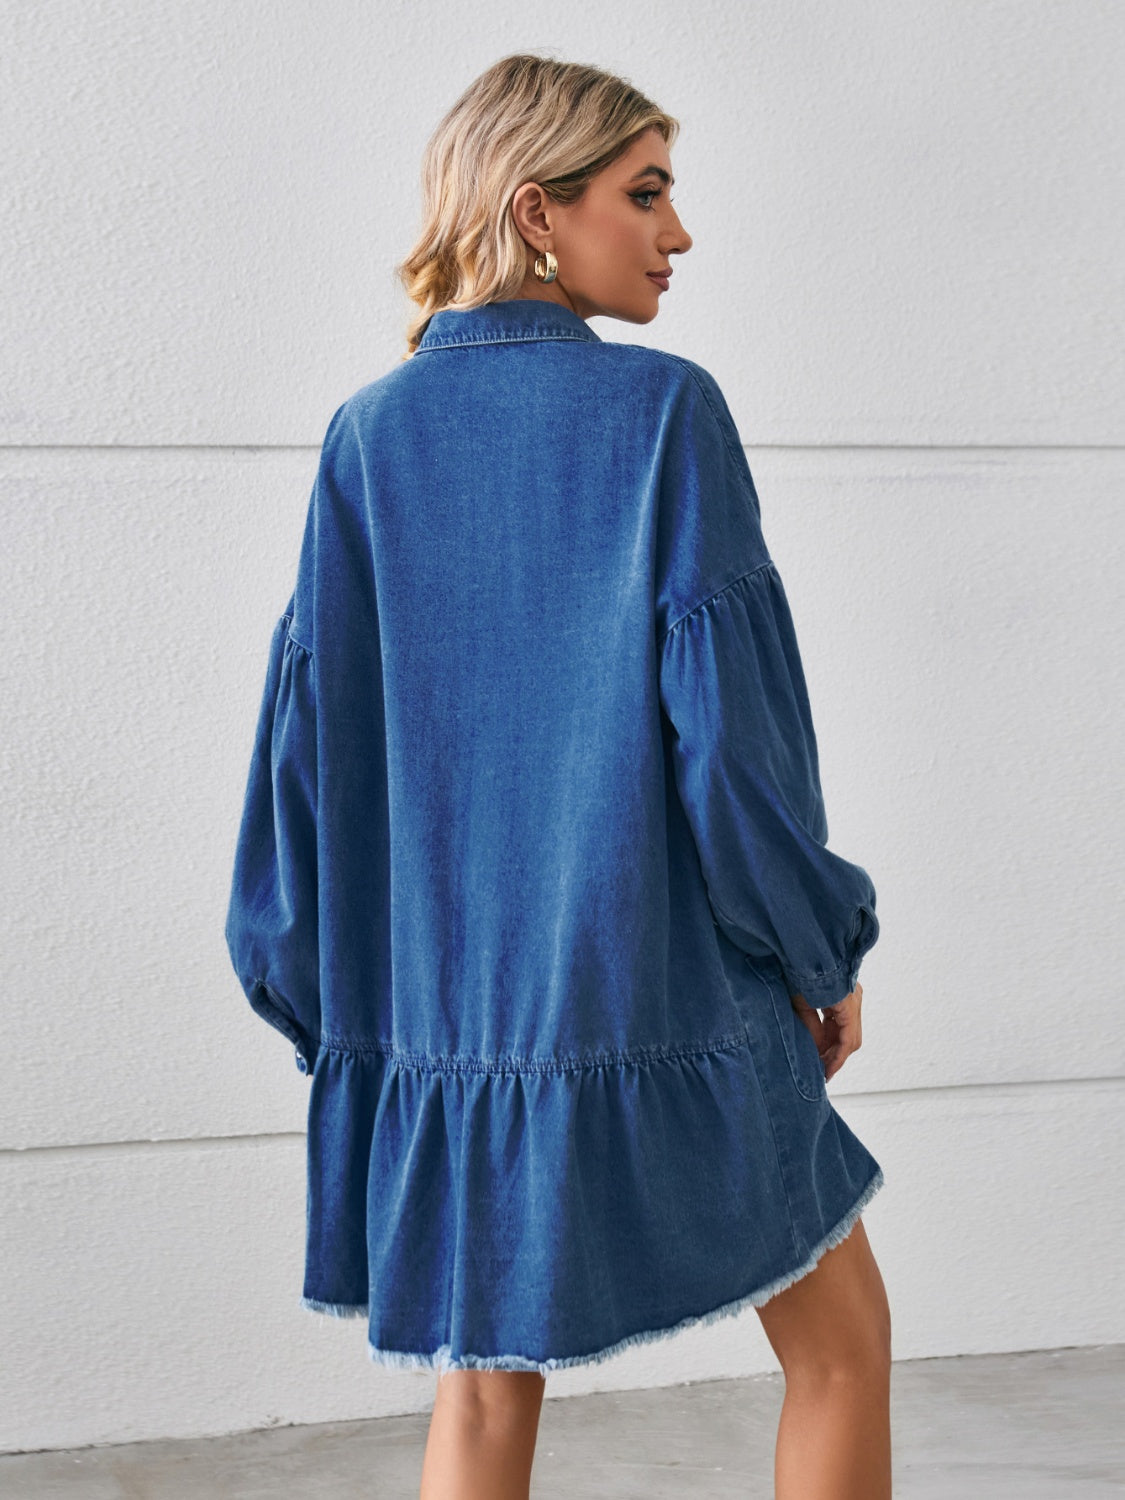 Chic denim dress with a trendy raw hem, comfy fit, button-up front, and handy pockets—perfect for a casual yet stylish look.